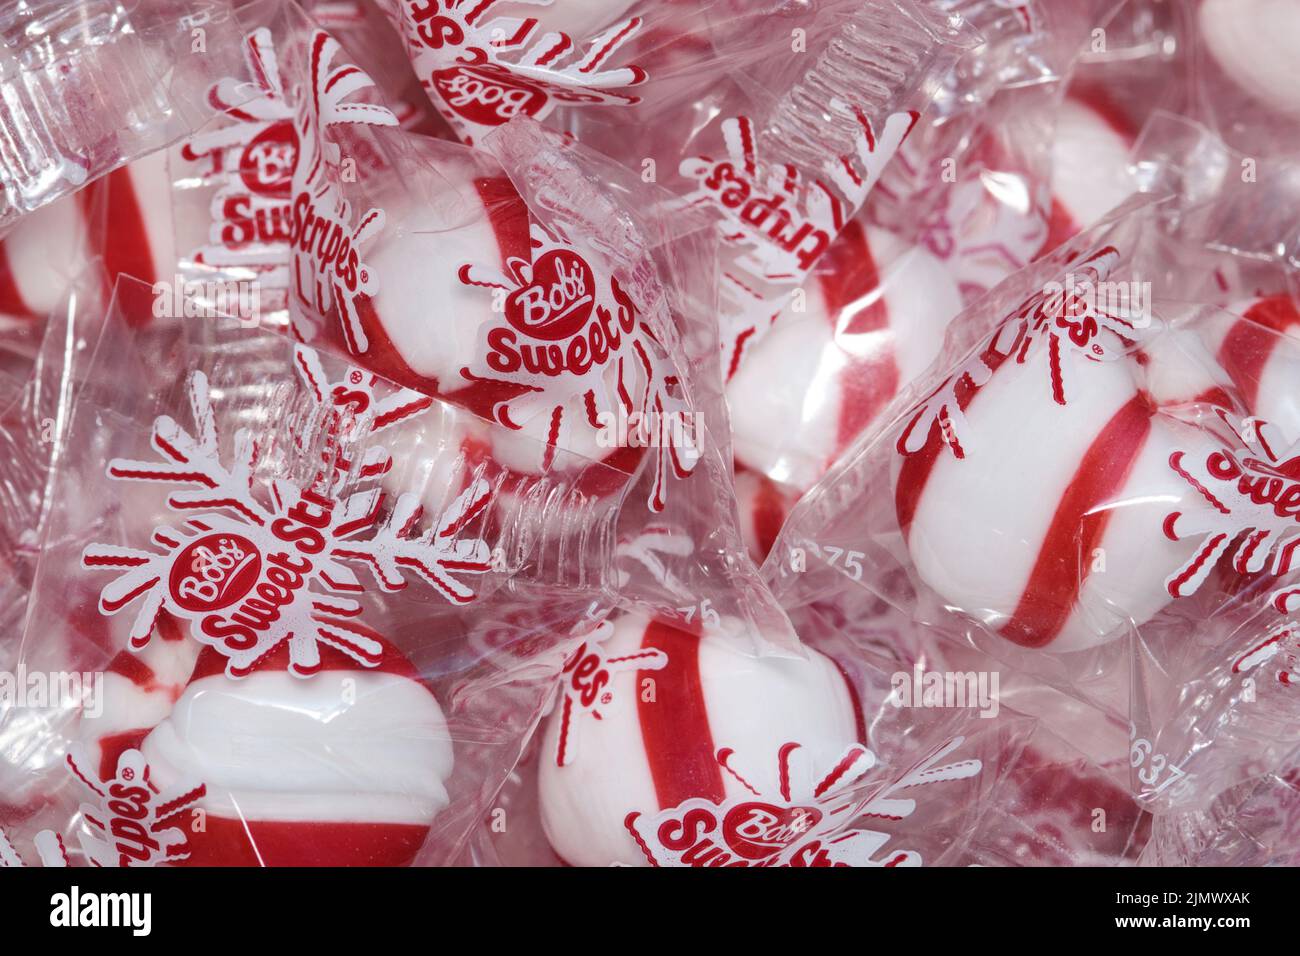 Houston, Texas USA 03-13-2022: Bobs Sweet Stripes hard peppermint candies in clear wrappers closeup scattered. Made by Ferrara Candy Company. Stock Photo